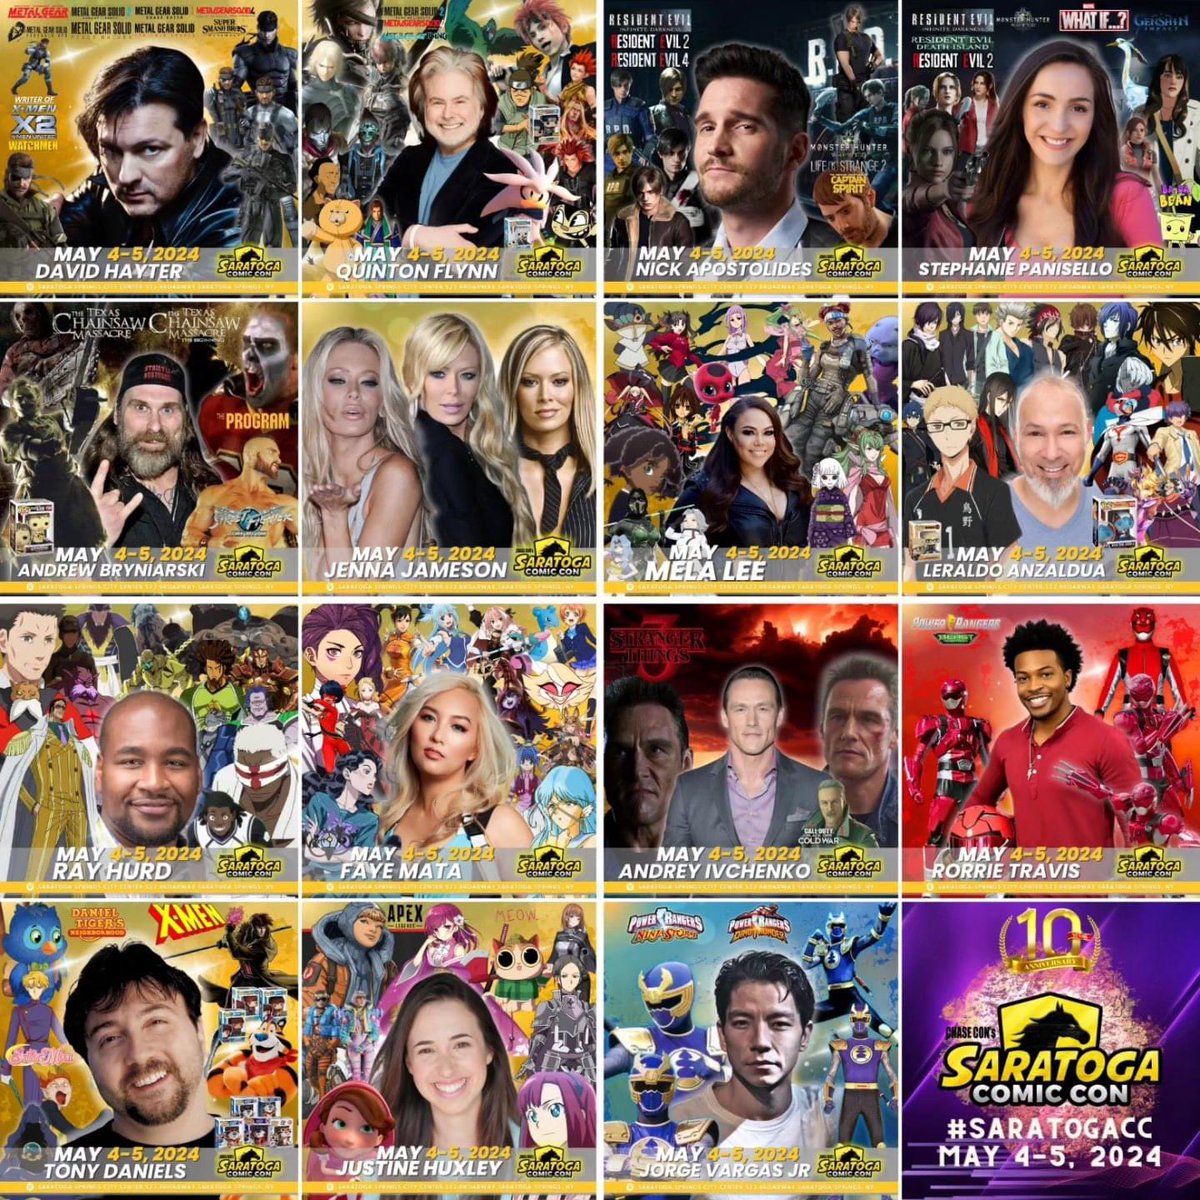 One more week until I and the rest of these fabulous guests get to meet you at Saratoga Comic Con!! 🤩🥳